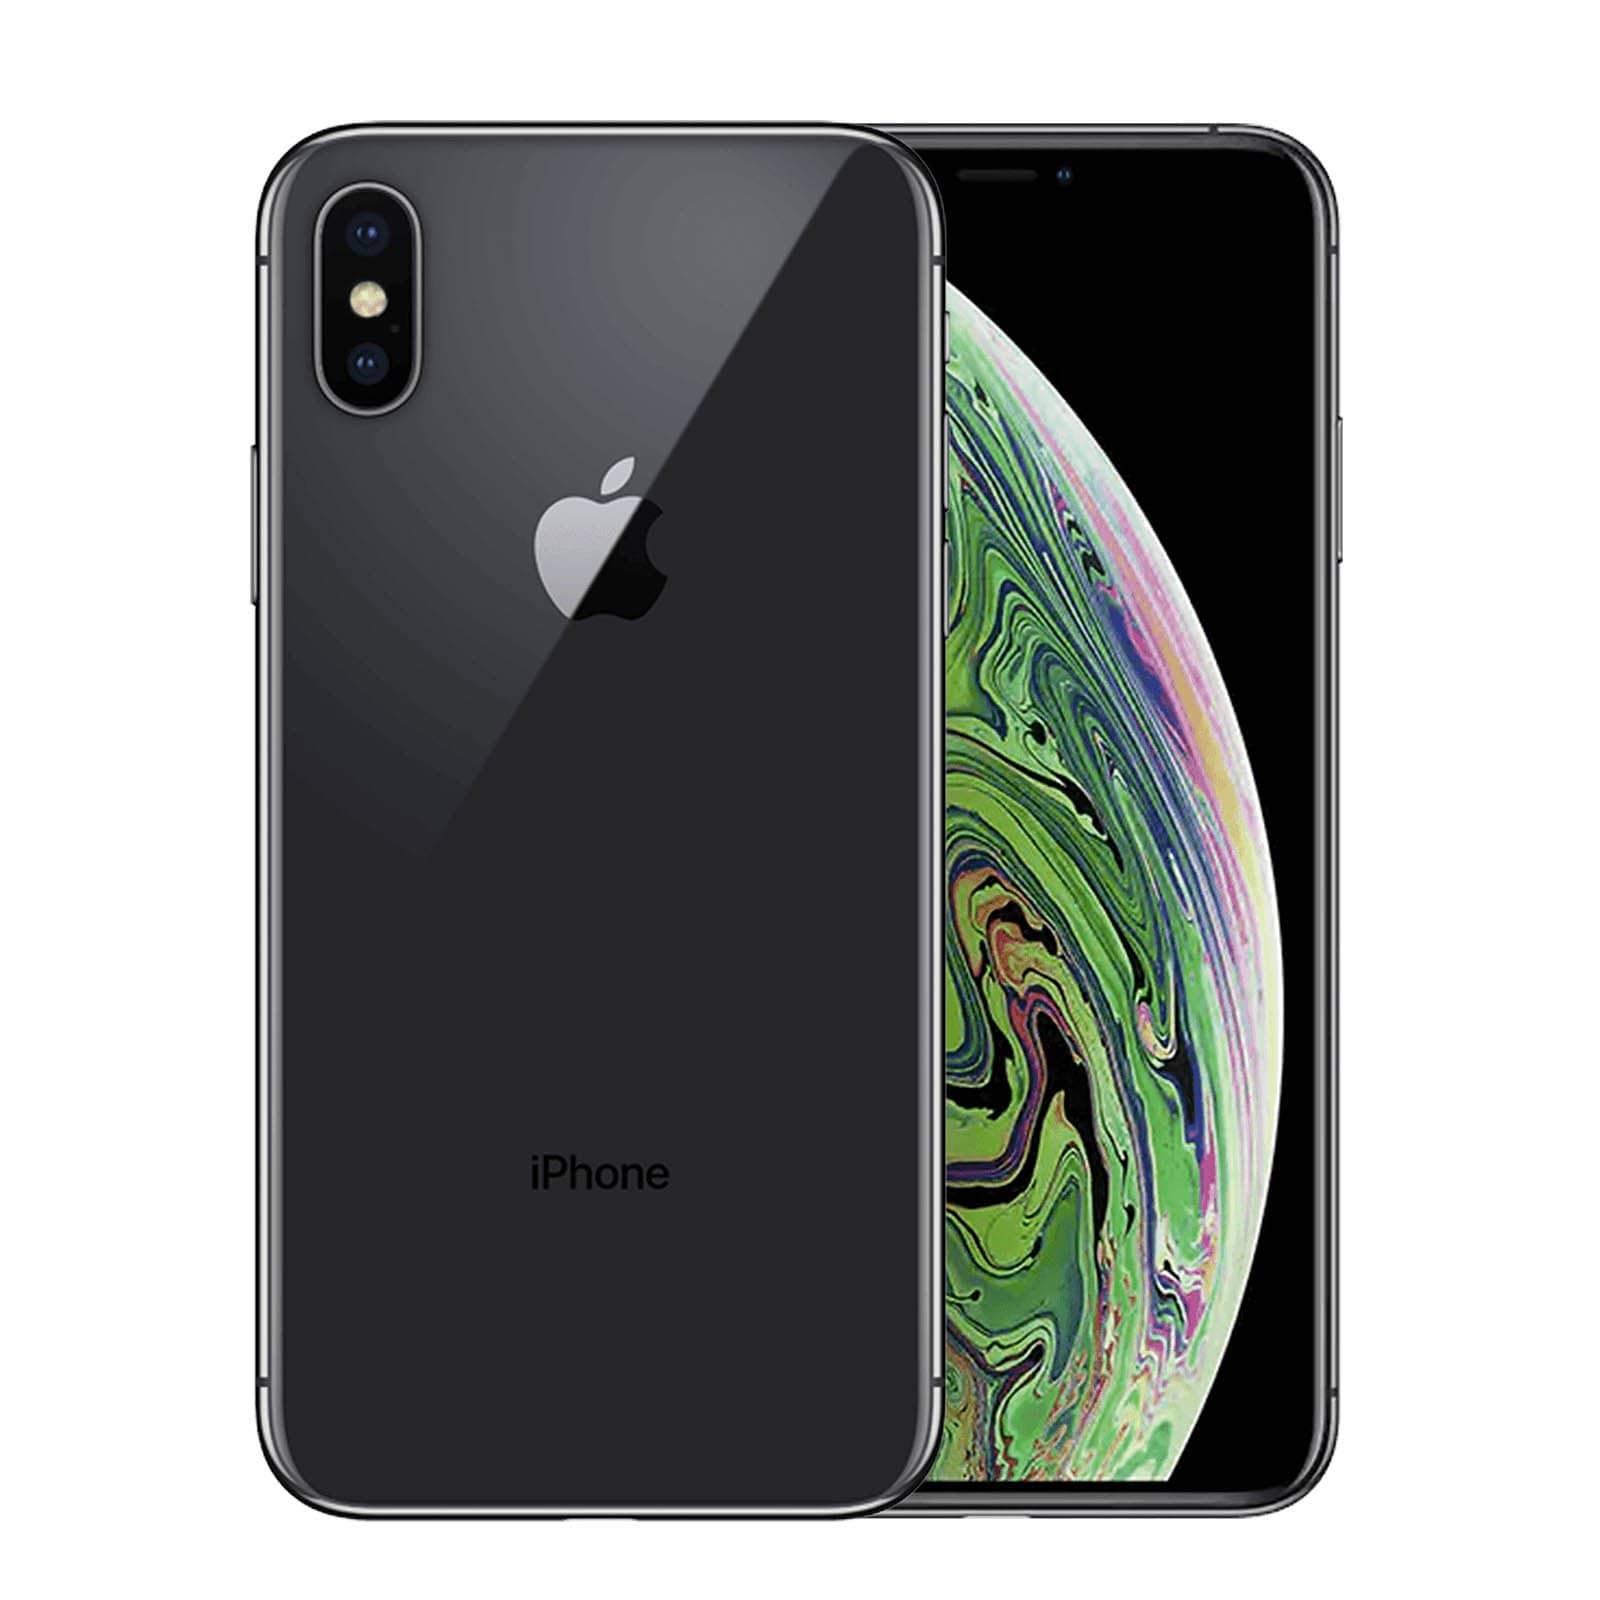 Apple iPhone XS Max 64GB Space Grey Very Good - Unlocked 64GB Space Grey Very Good